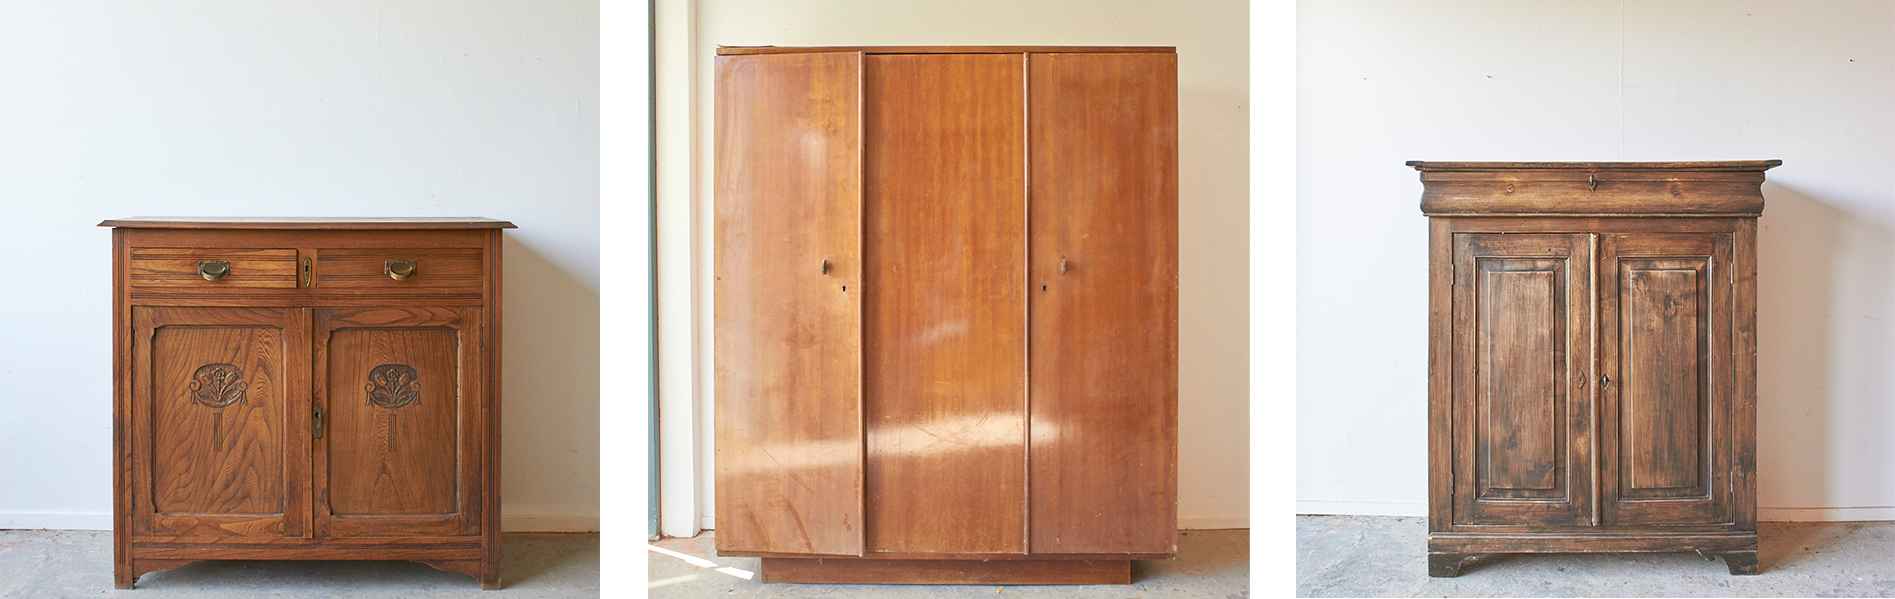 a wooden cabinet in a room vintage meubels